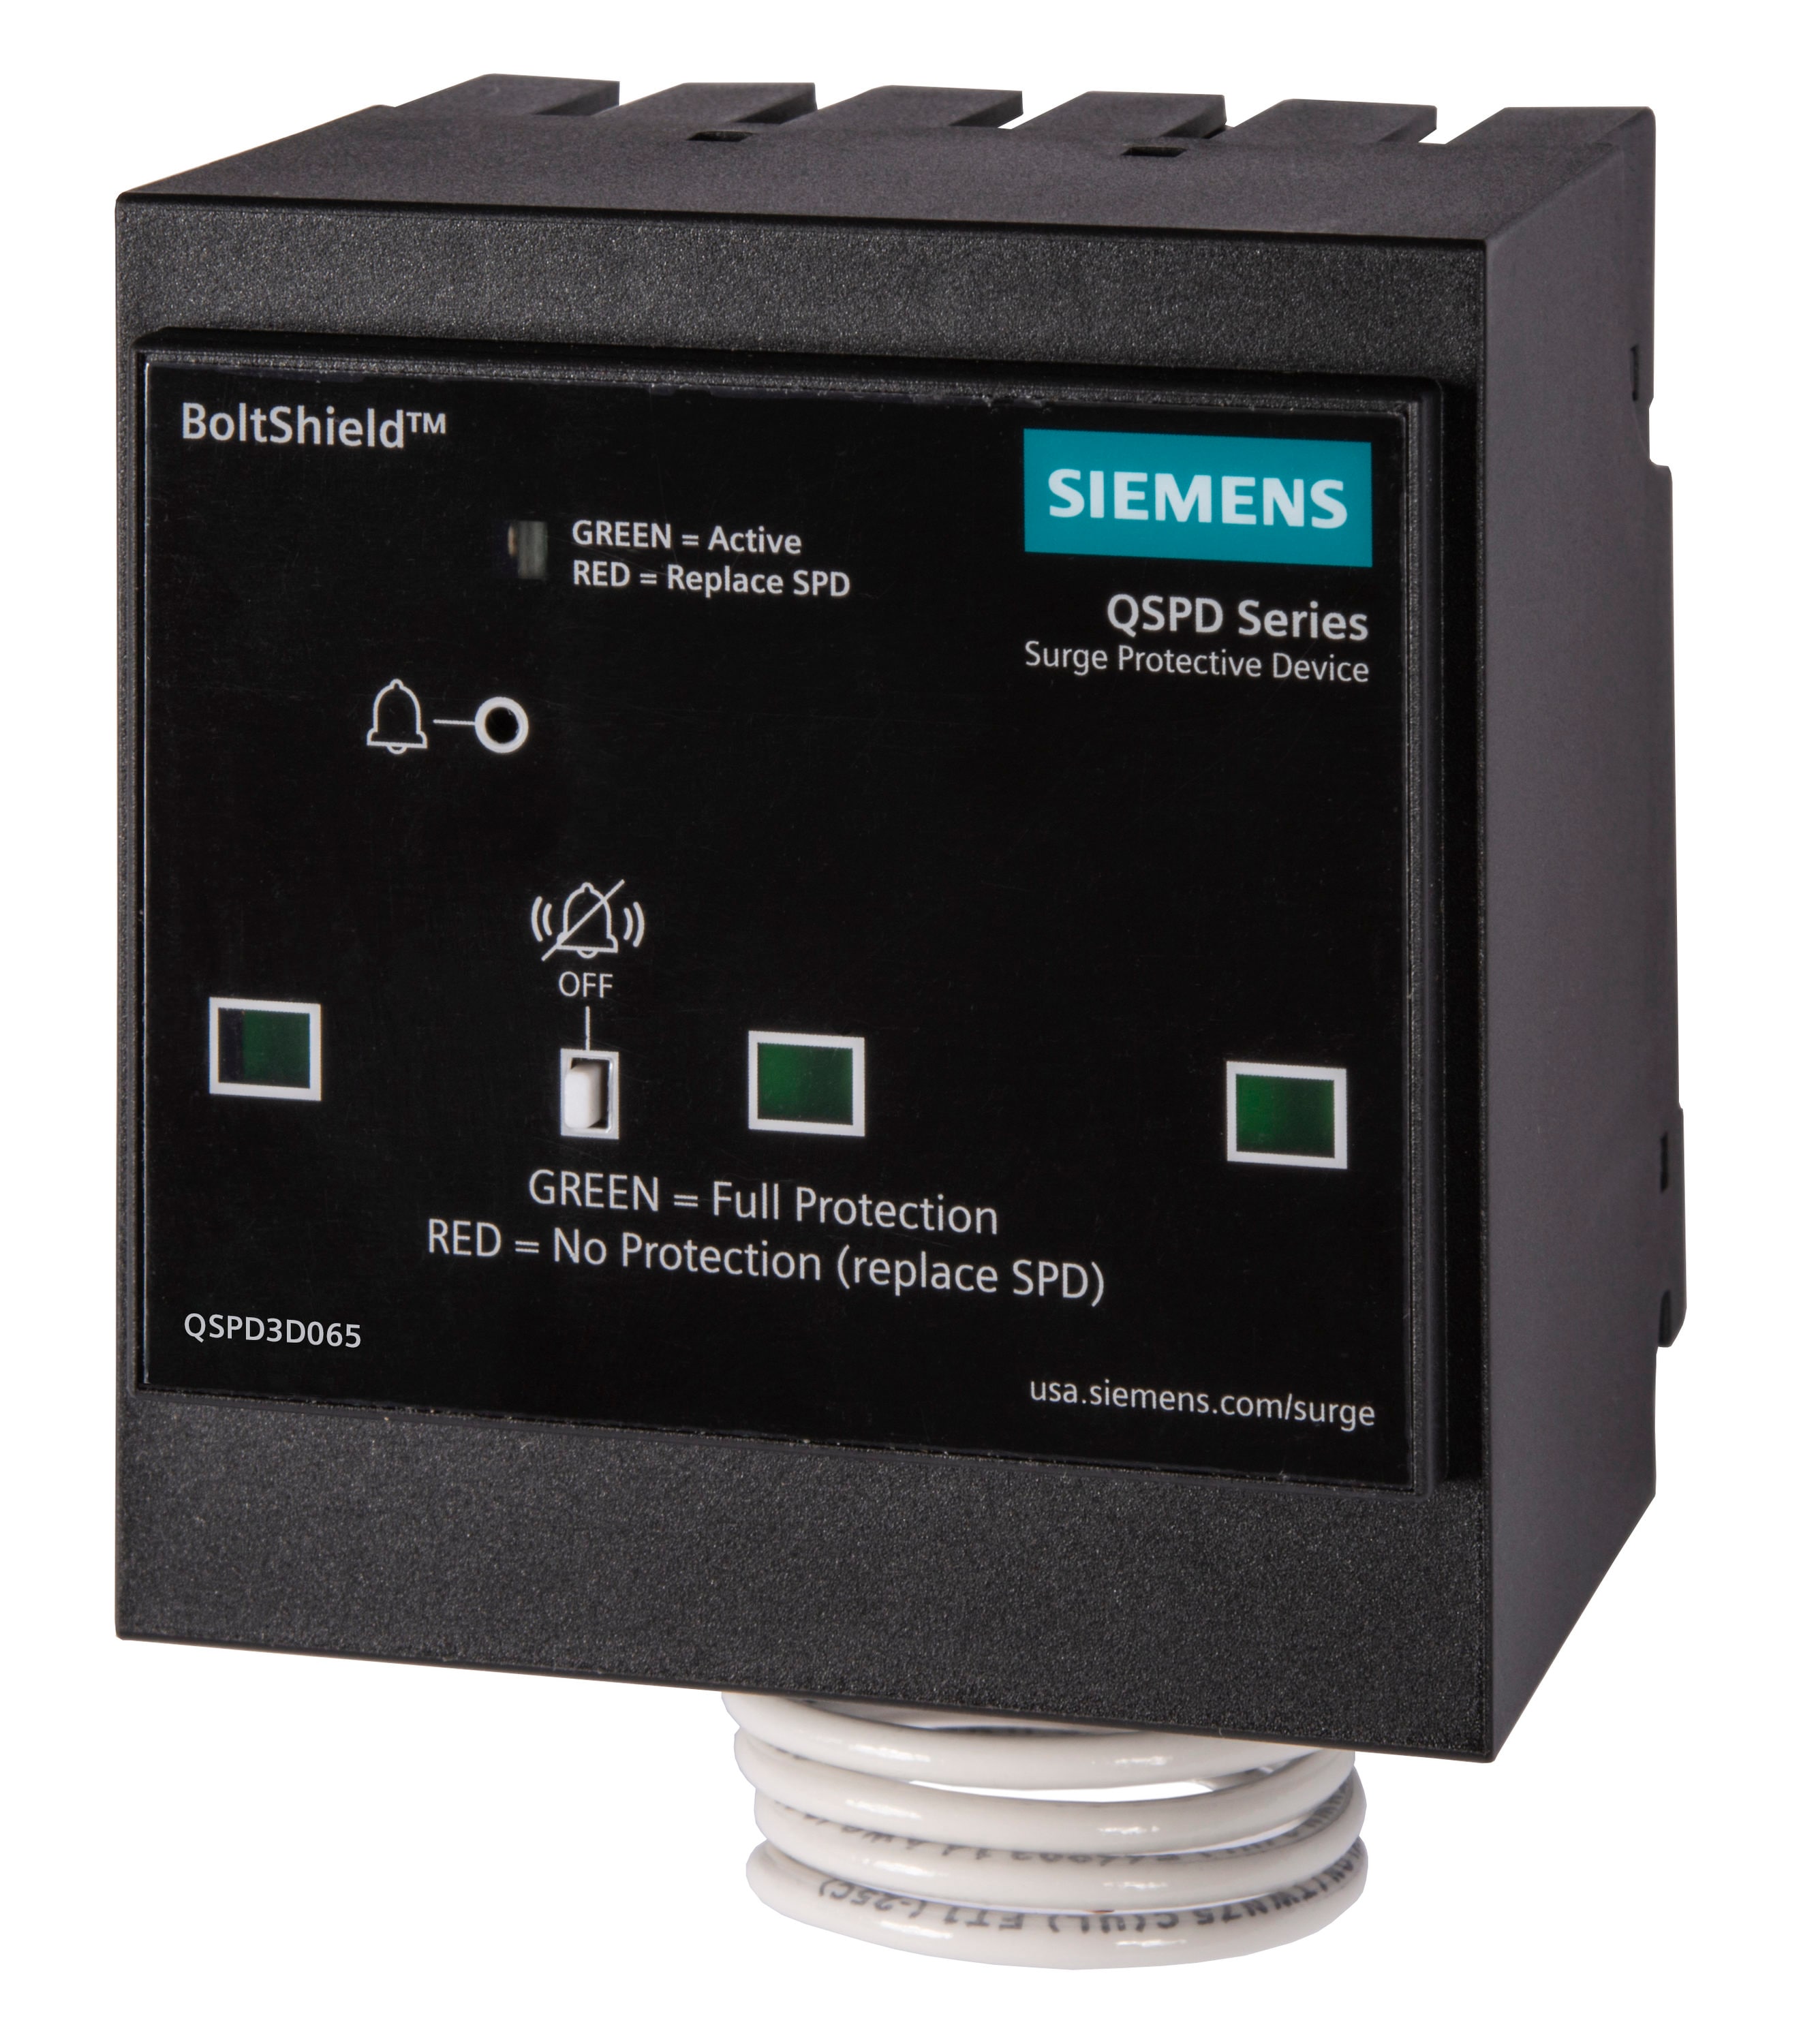 Siemens FirstSurge Whole House Surge Protector 